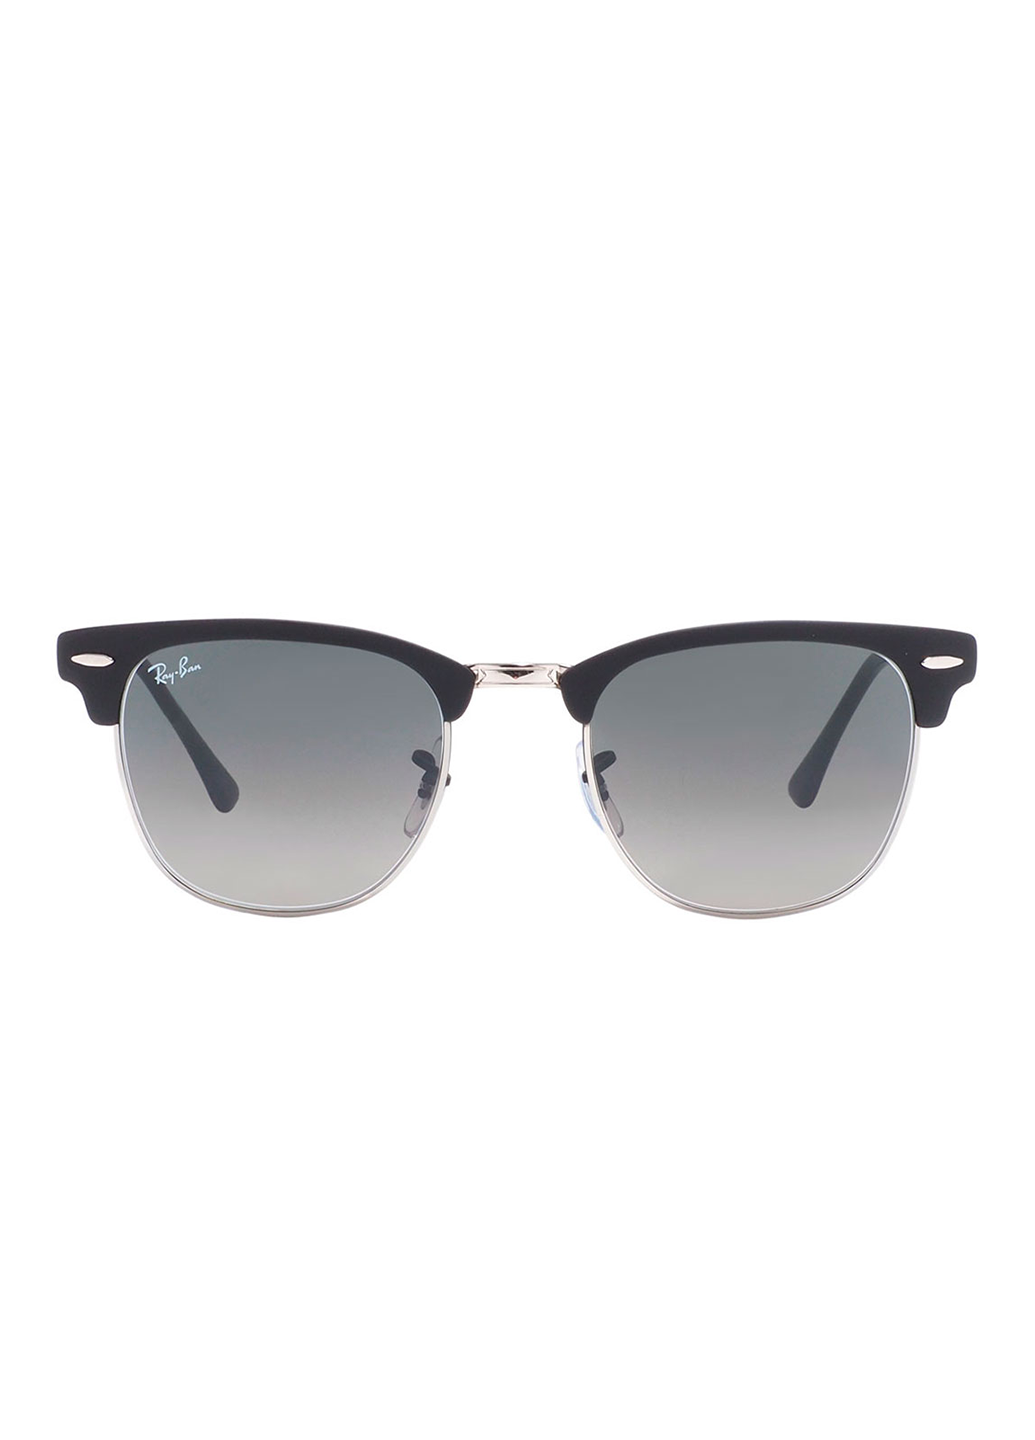 Ray-Ban Clubmaster Metal RB 3716 (9118/71)